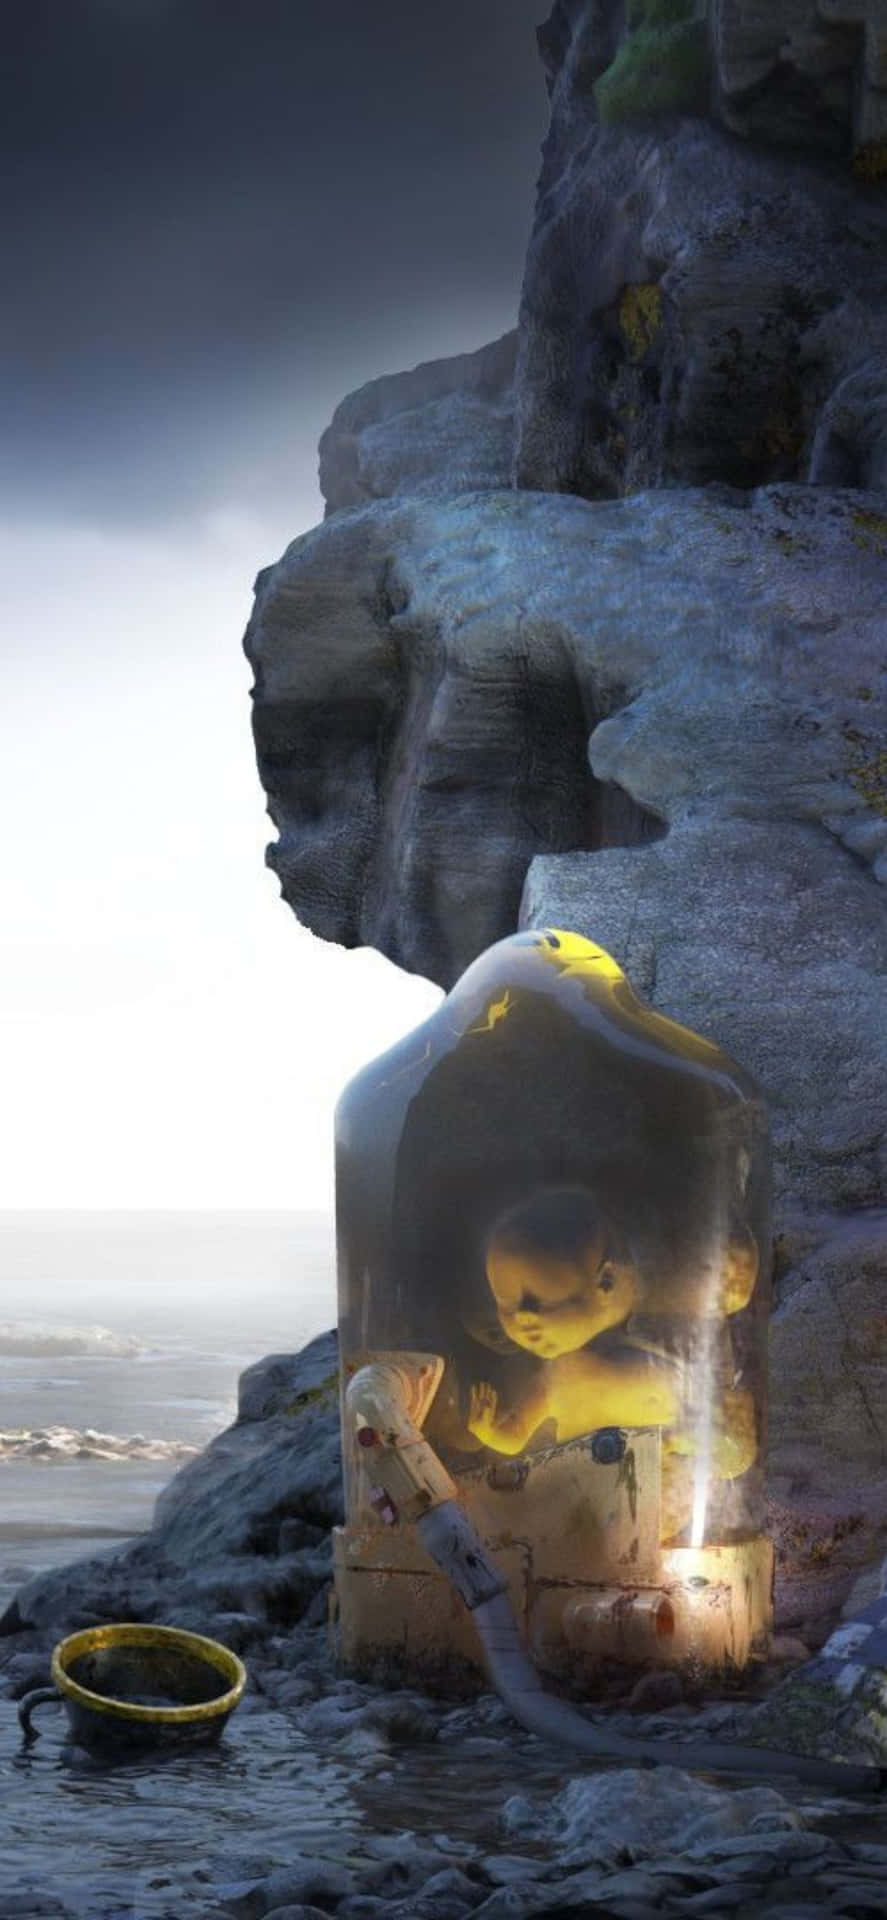 Play Death Stranding on the newly released Iphone XS Max